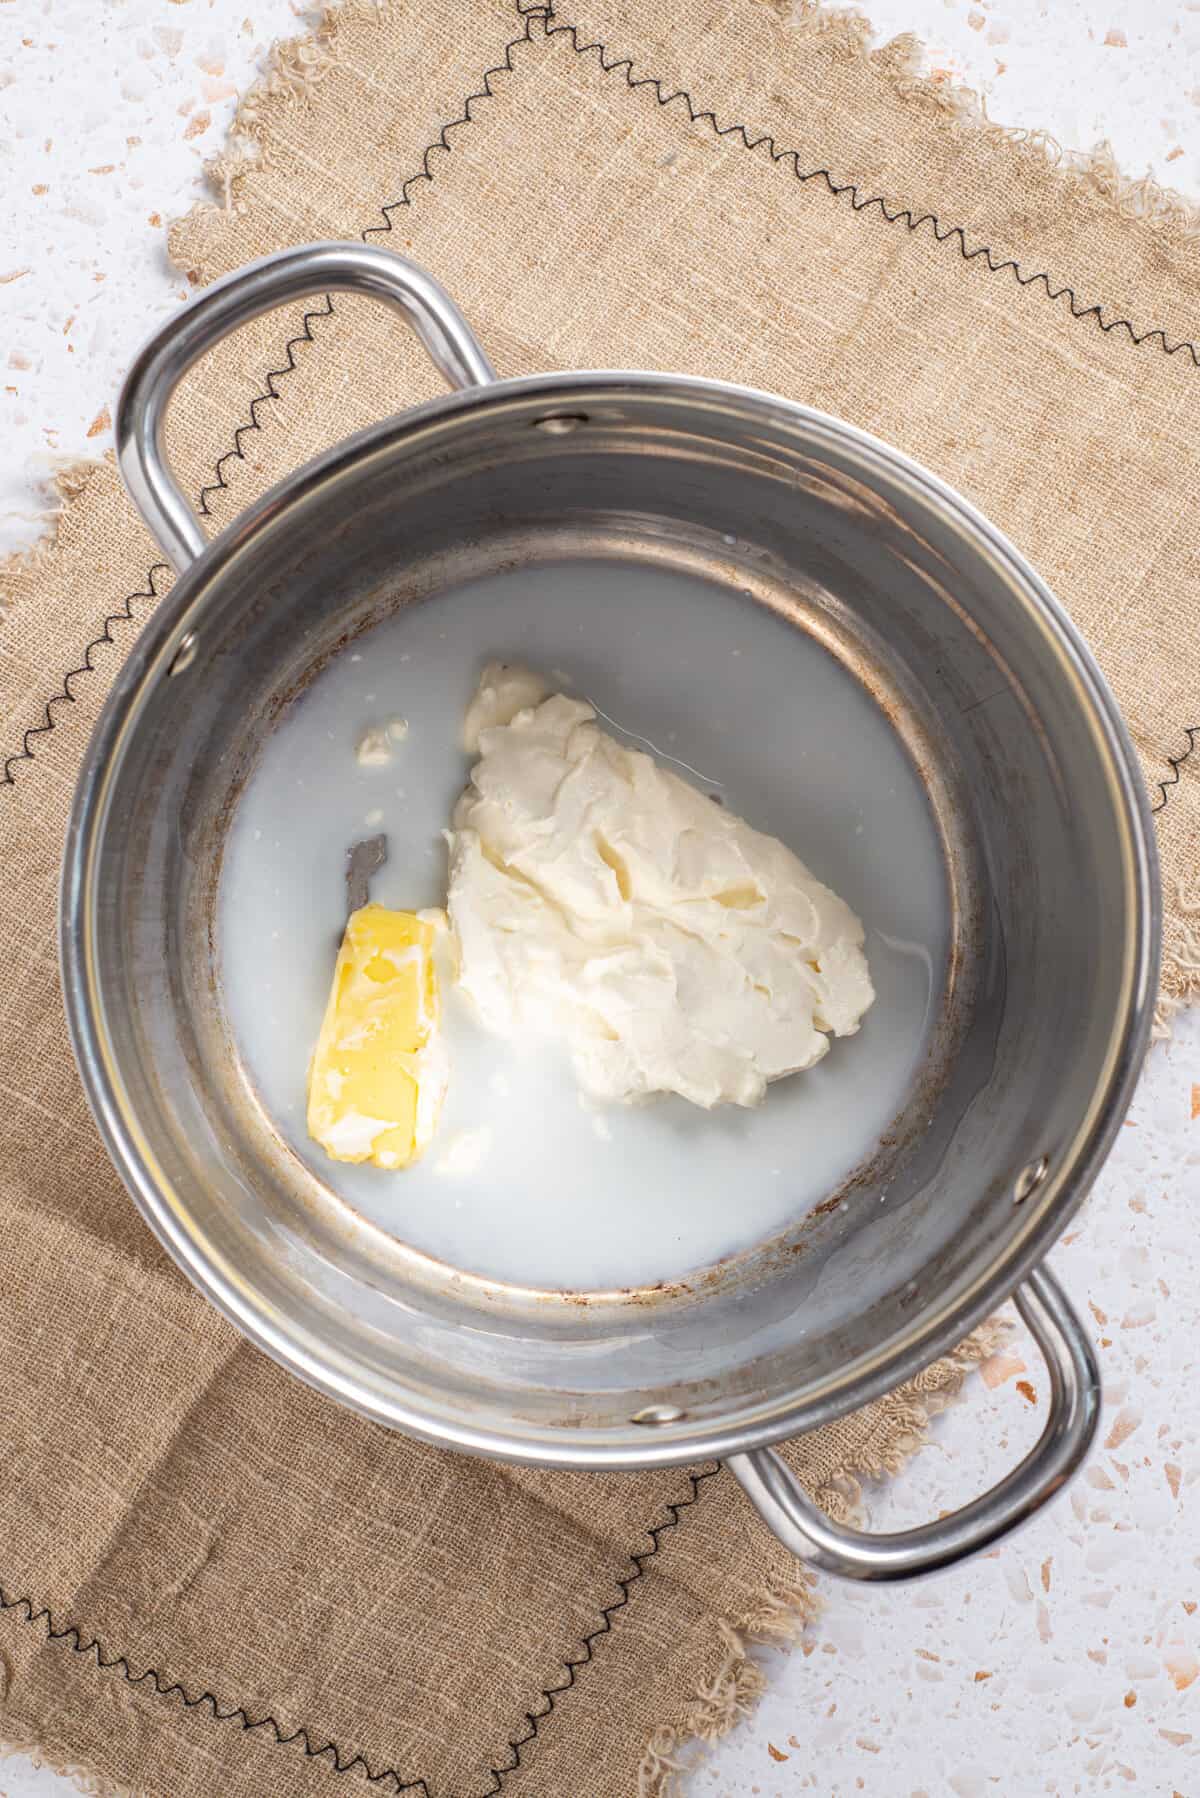 An image of butter and cream cheese being melted into a saucepan.